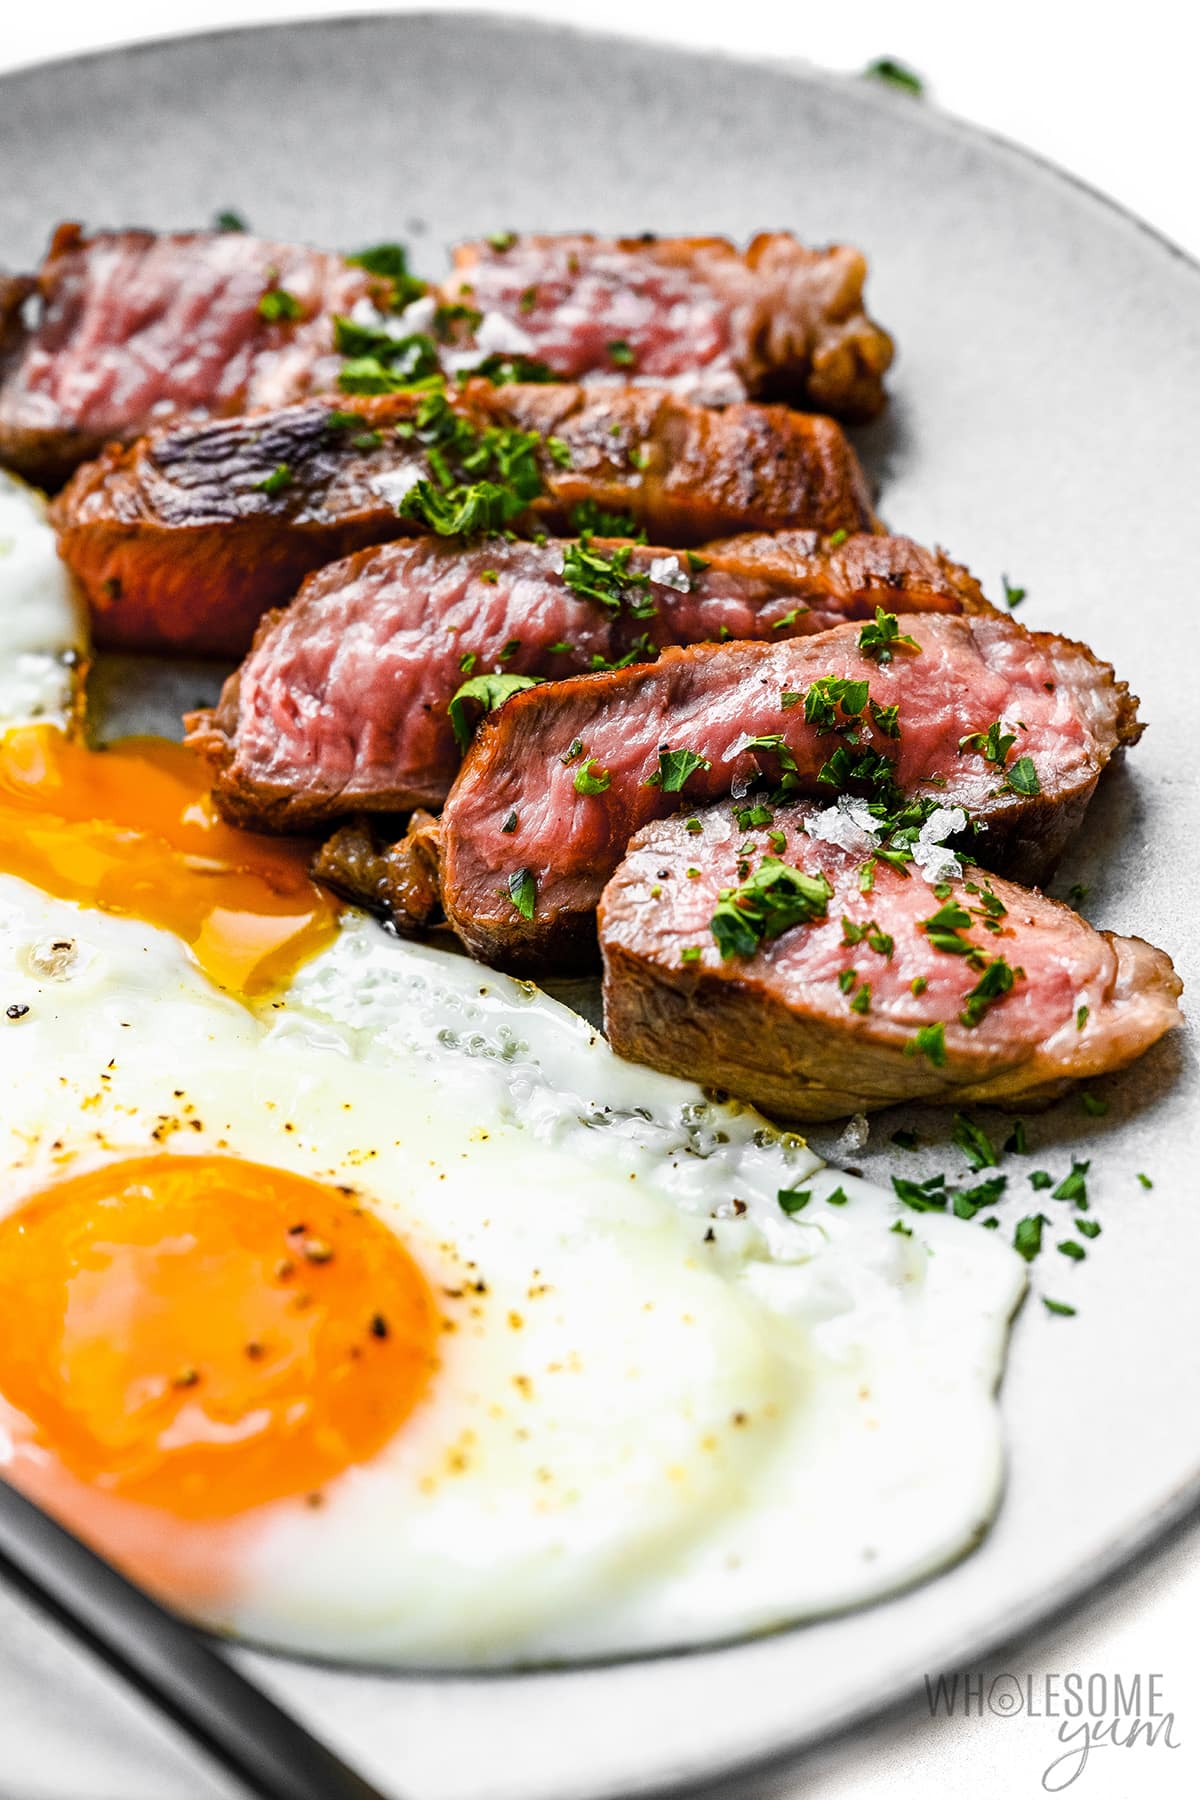 Sliced steak and eggs on a plate.